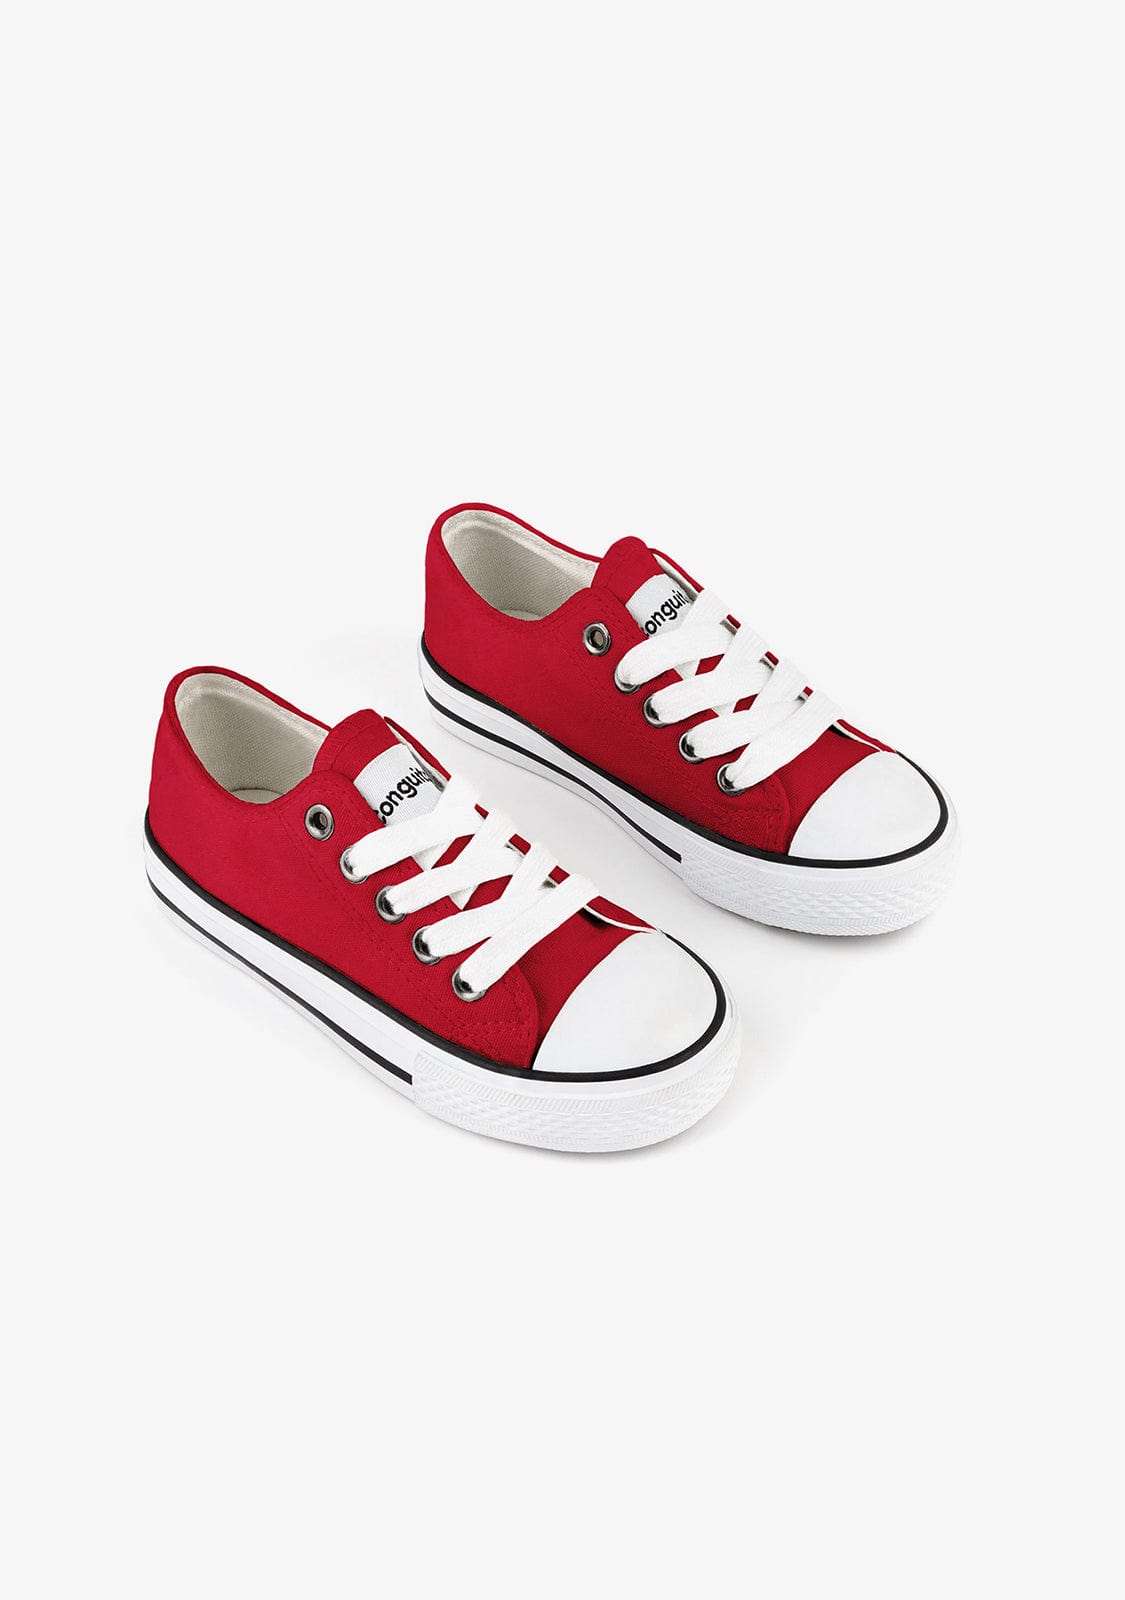 CONGUITOS Shoes Unisex Red Canvas Sneakers